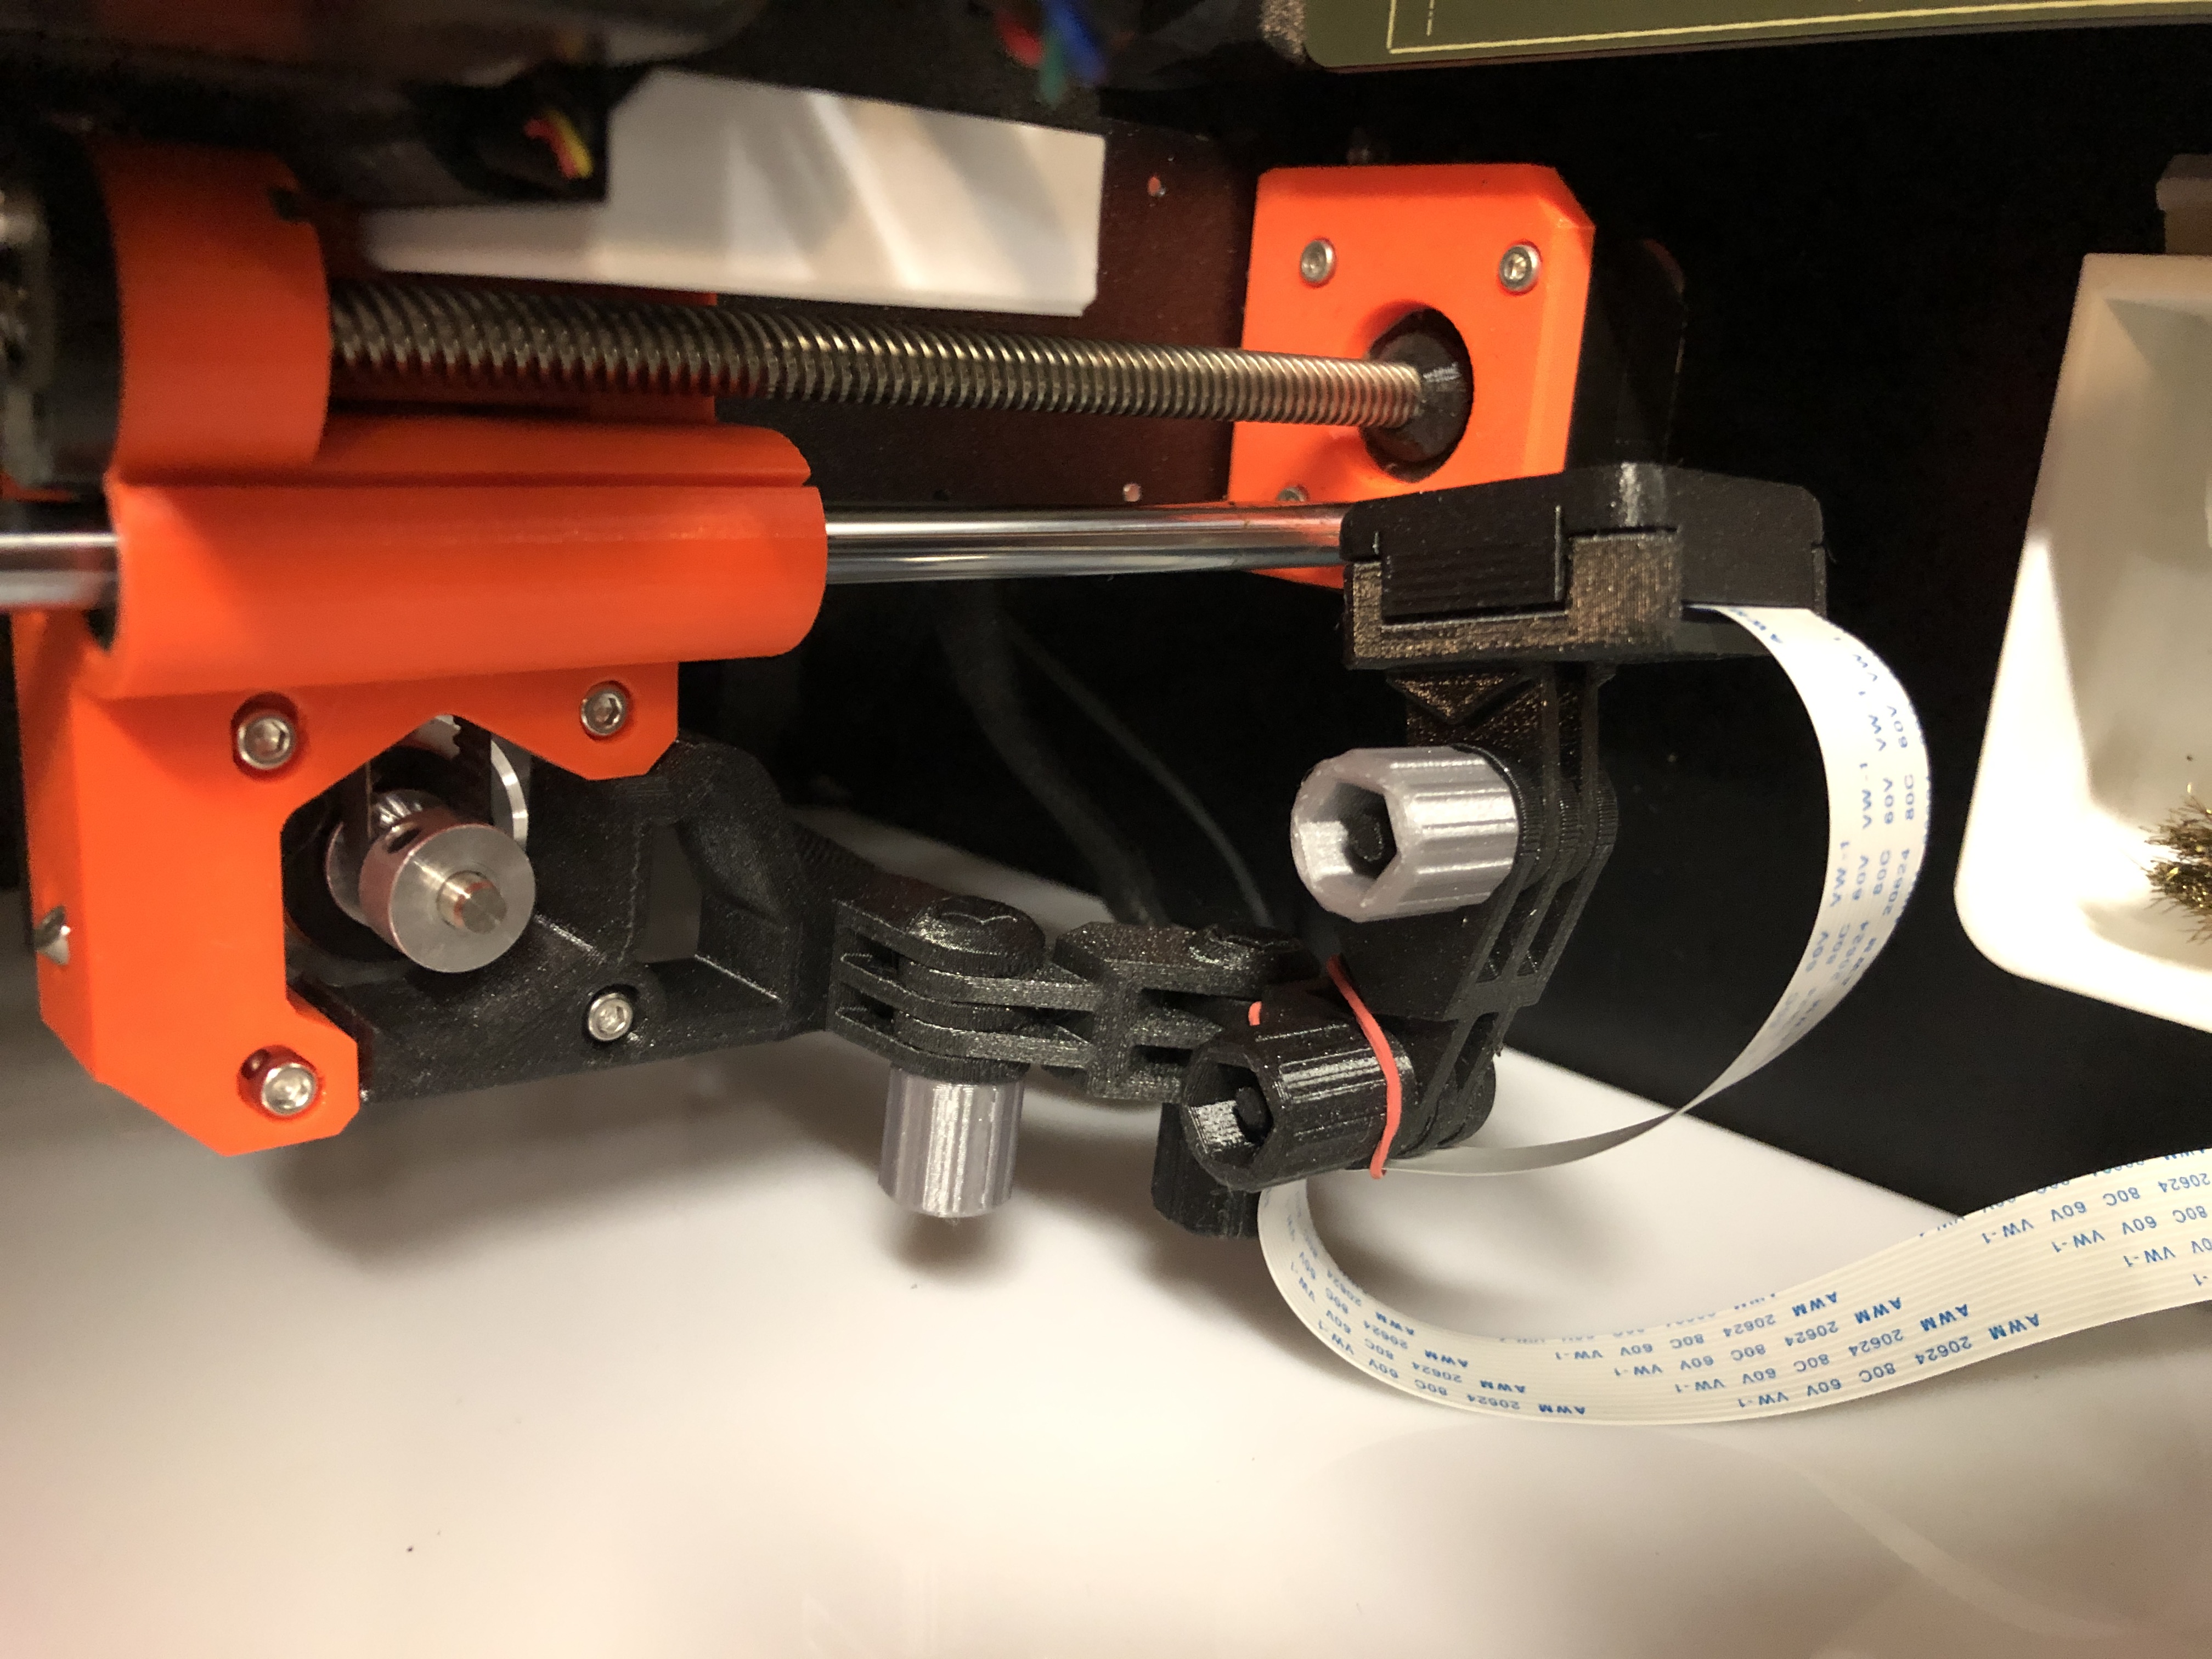 X-Axis Prusa Mount